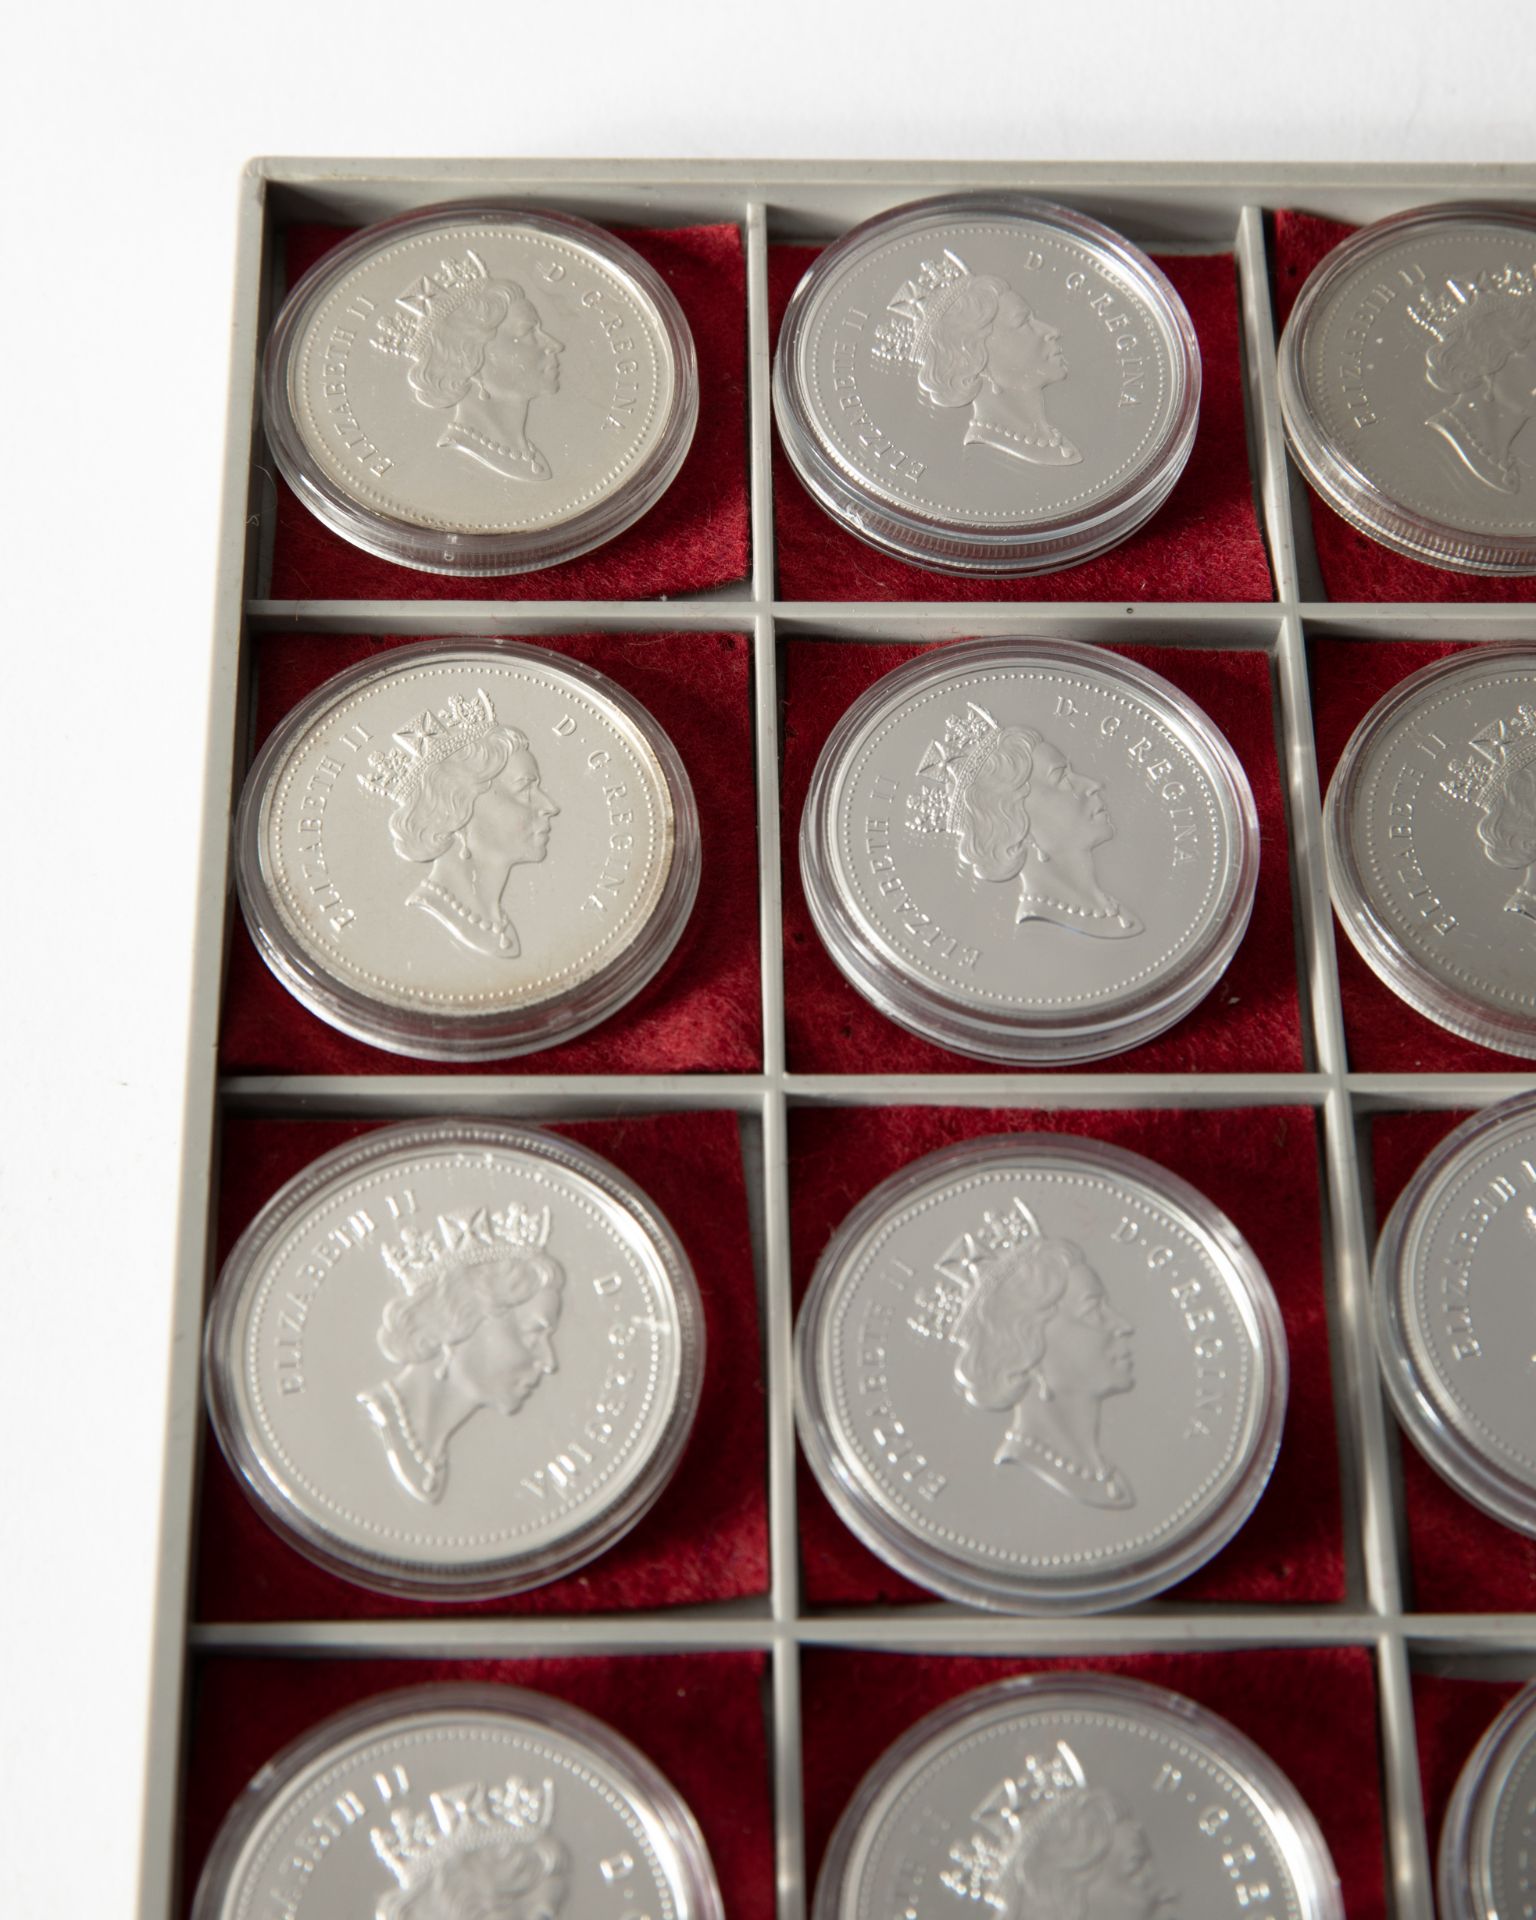 89 silver dollars Canada, 1949-2019 - Image 31 of 37